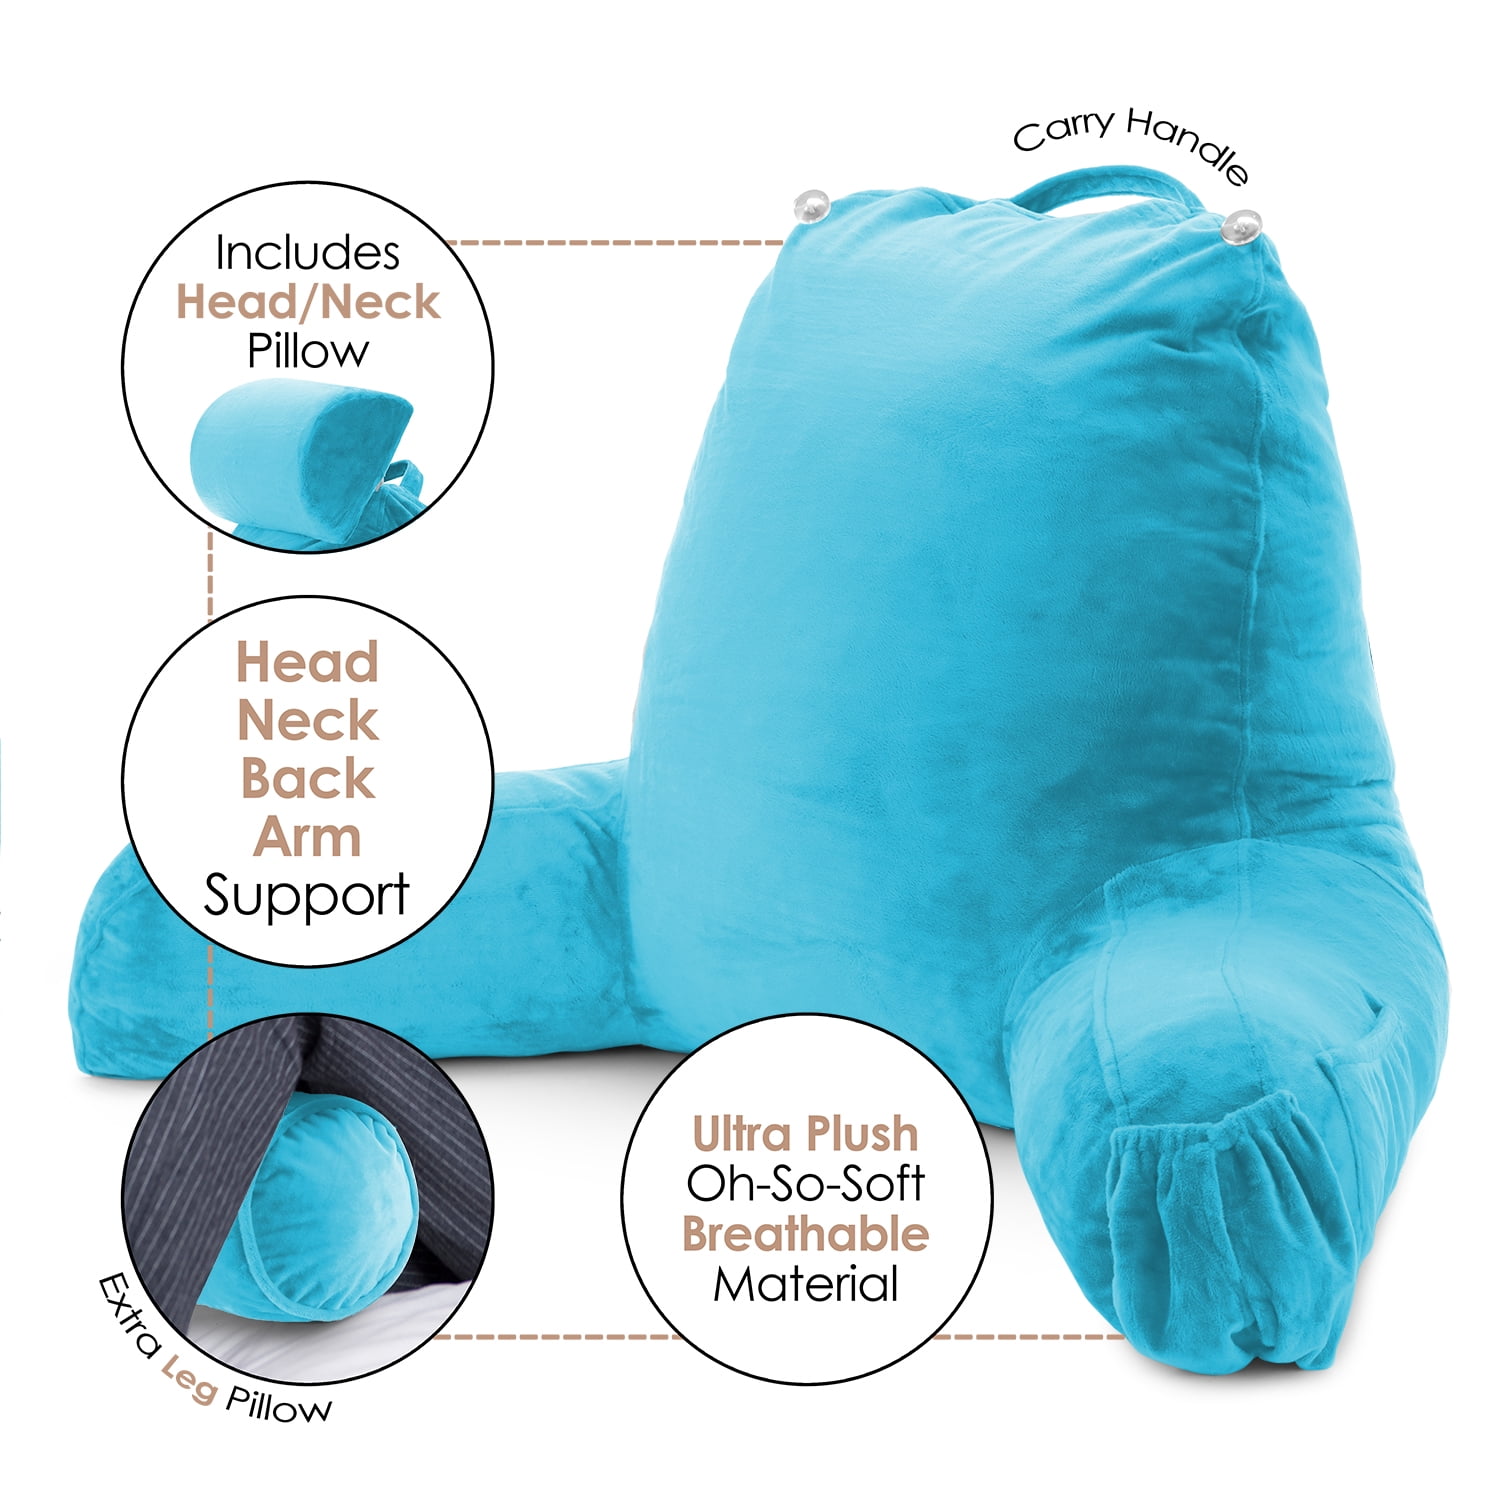 Nestl Backrest Reading Pillow, Bed Rest Pillow with Arms, Shredded Memory Foam Back Support Pillows, Large, Gray, Size: Premium Large